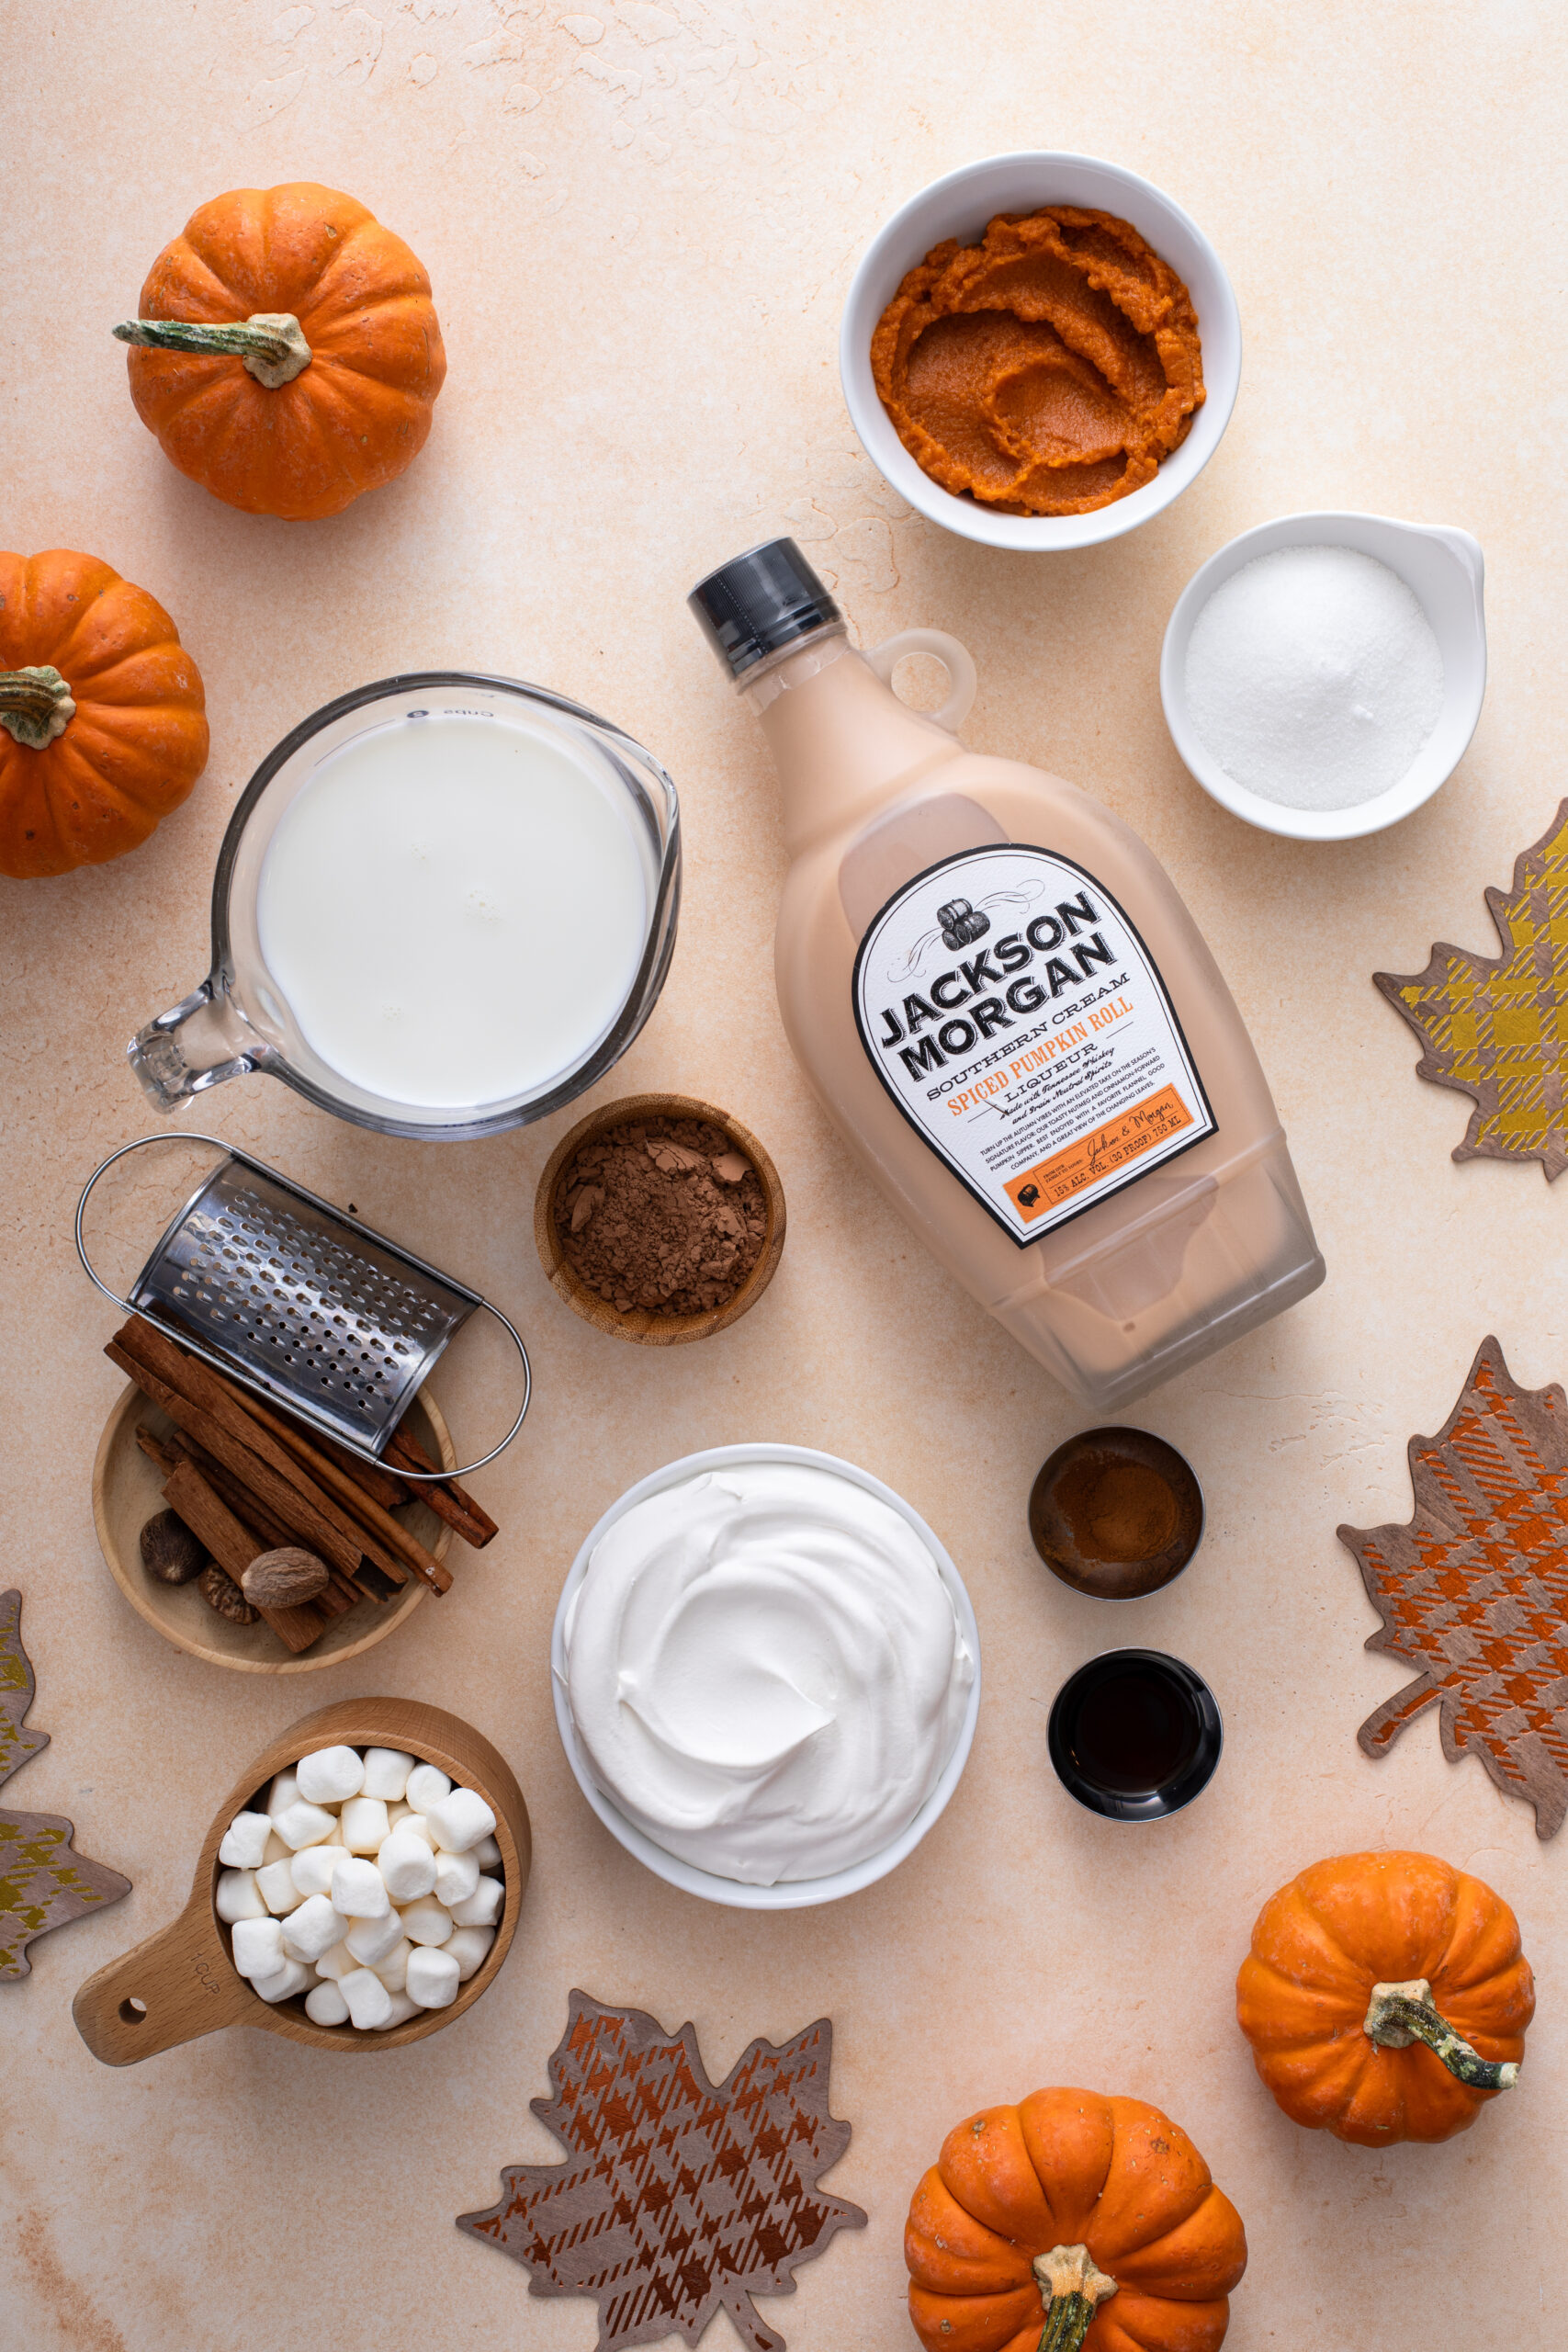 The perfect sweater weather hot chocolate recipe that is sure to be a hit at any gathering this season! Click HERE to make the Perfect Pumpkin Hot Chocolate HERE!